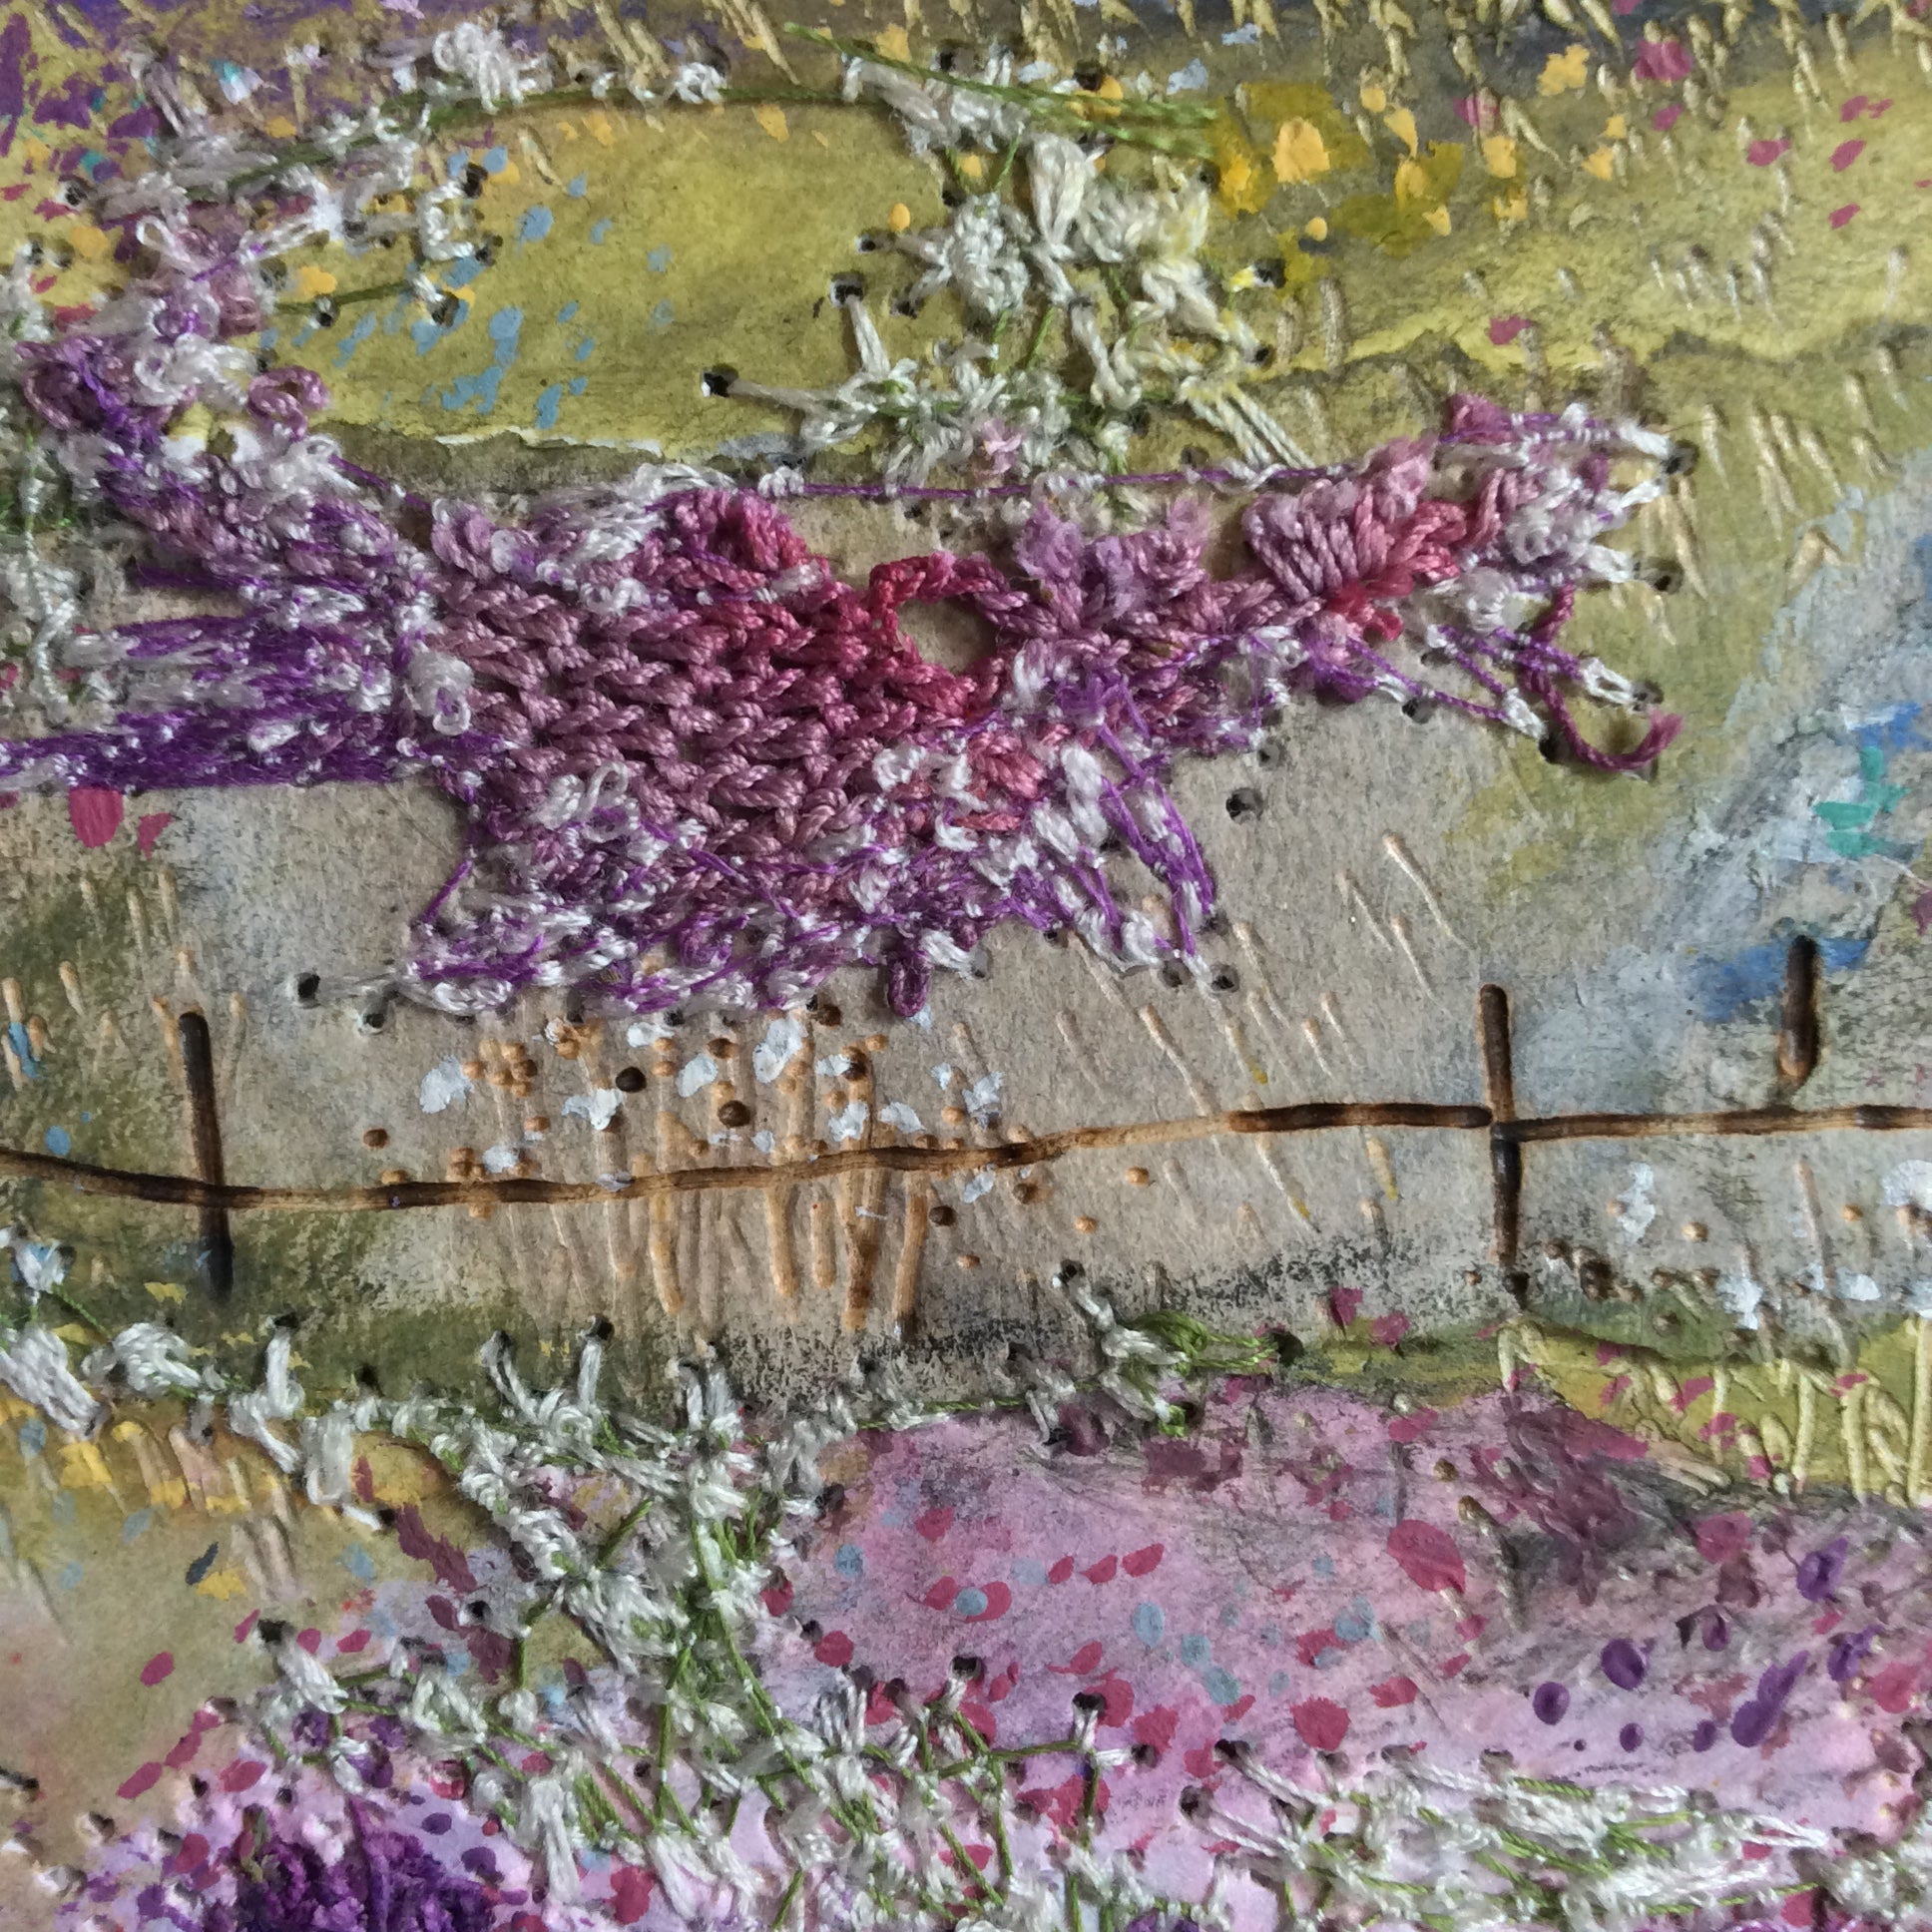 Mixed Media Art By Louise O'Hara - “A crop of Lavender”